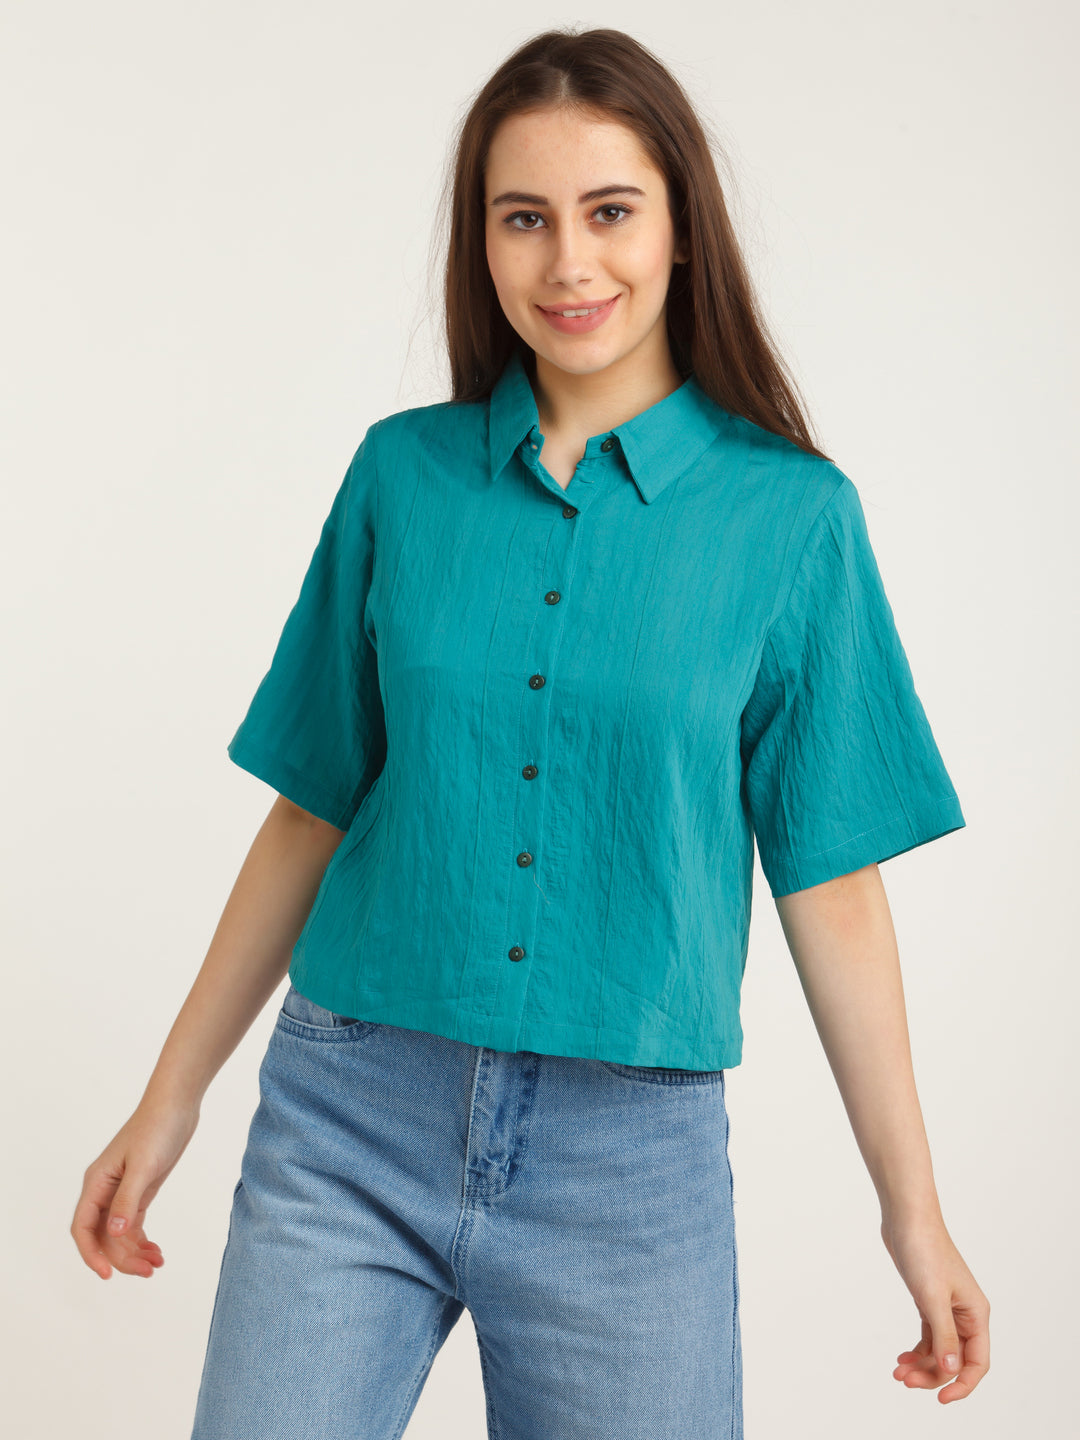 Teal-Solid-Shirt-for-Women-VT02958_118-Teal-2